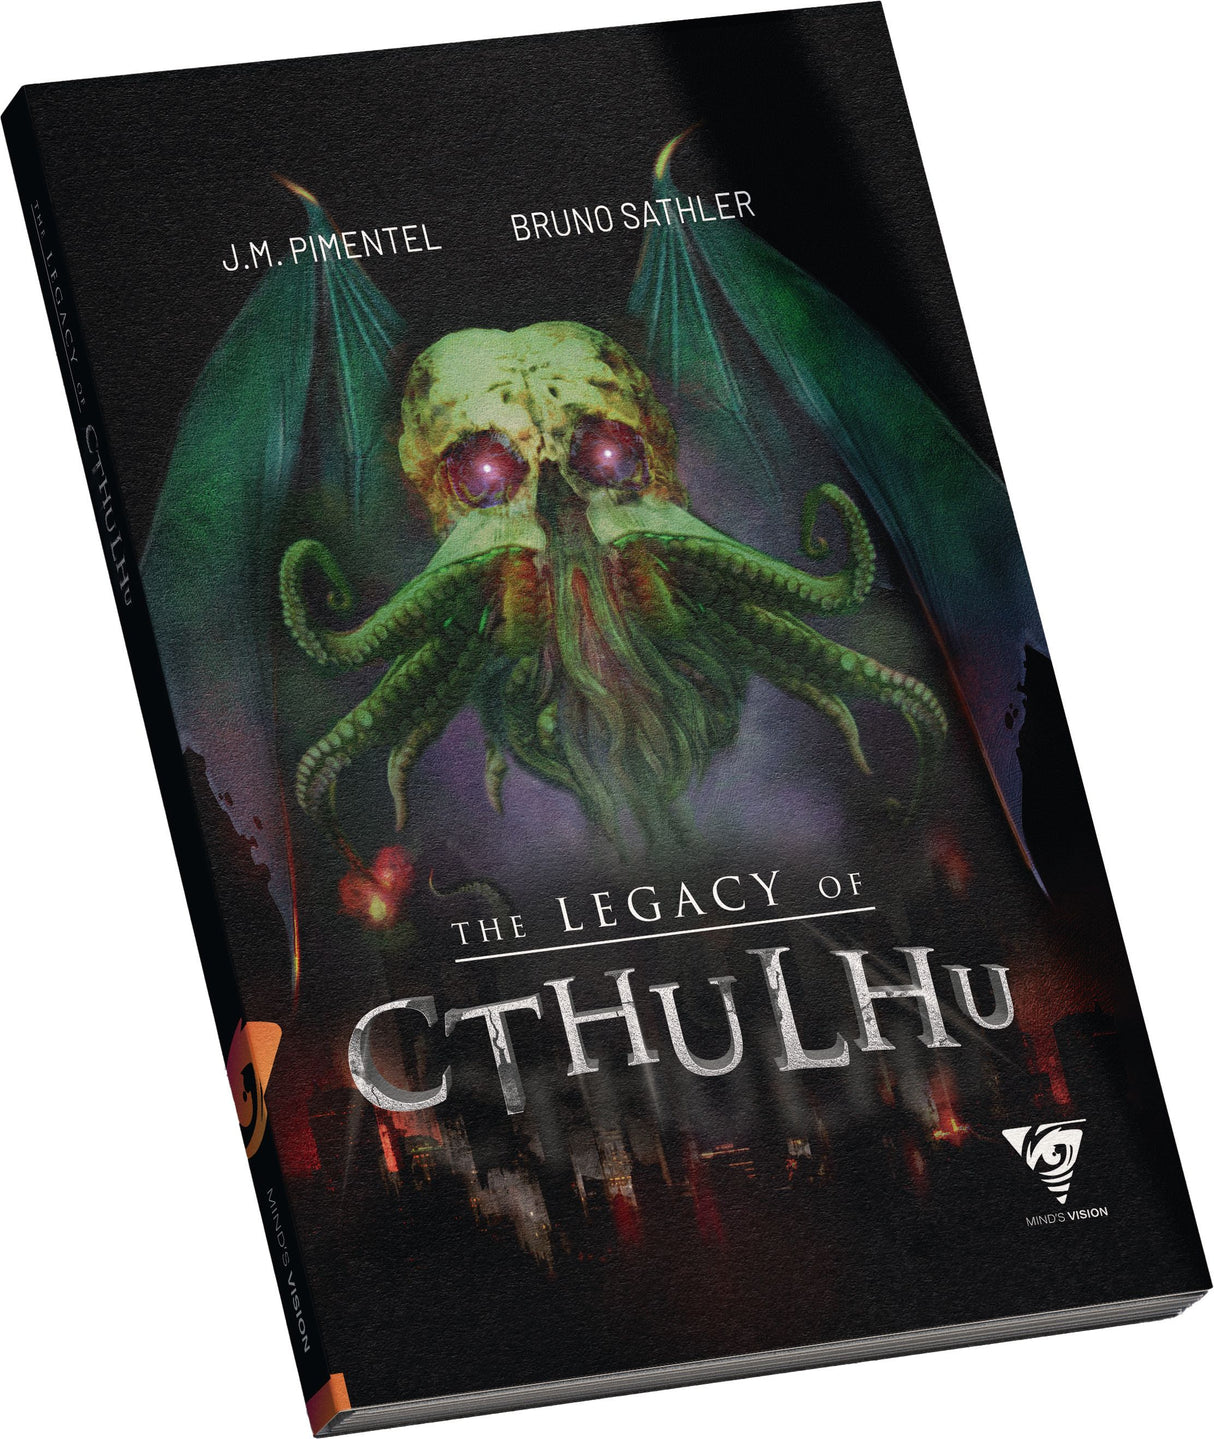 The Legacy of Cthulhu (Collector's Edition)